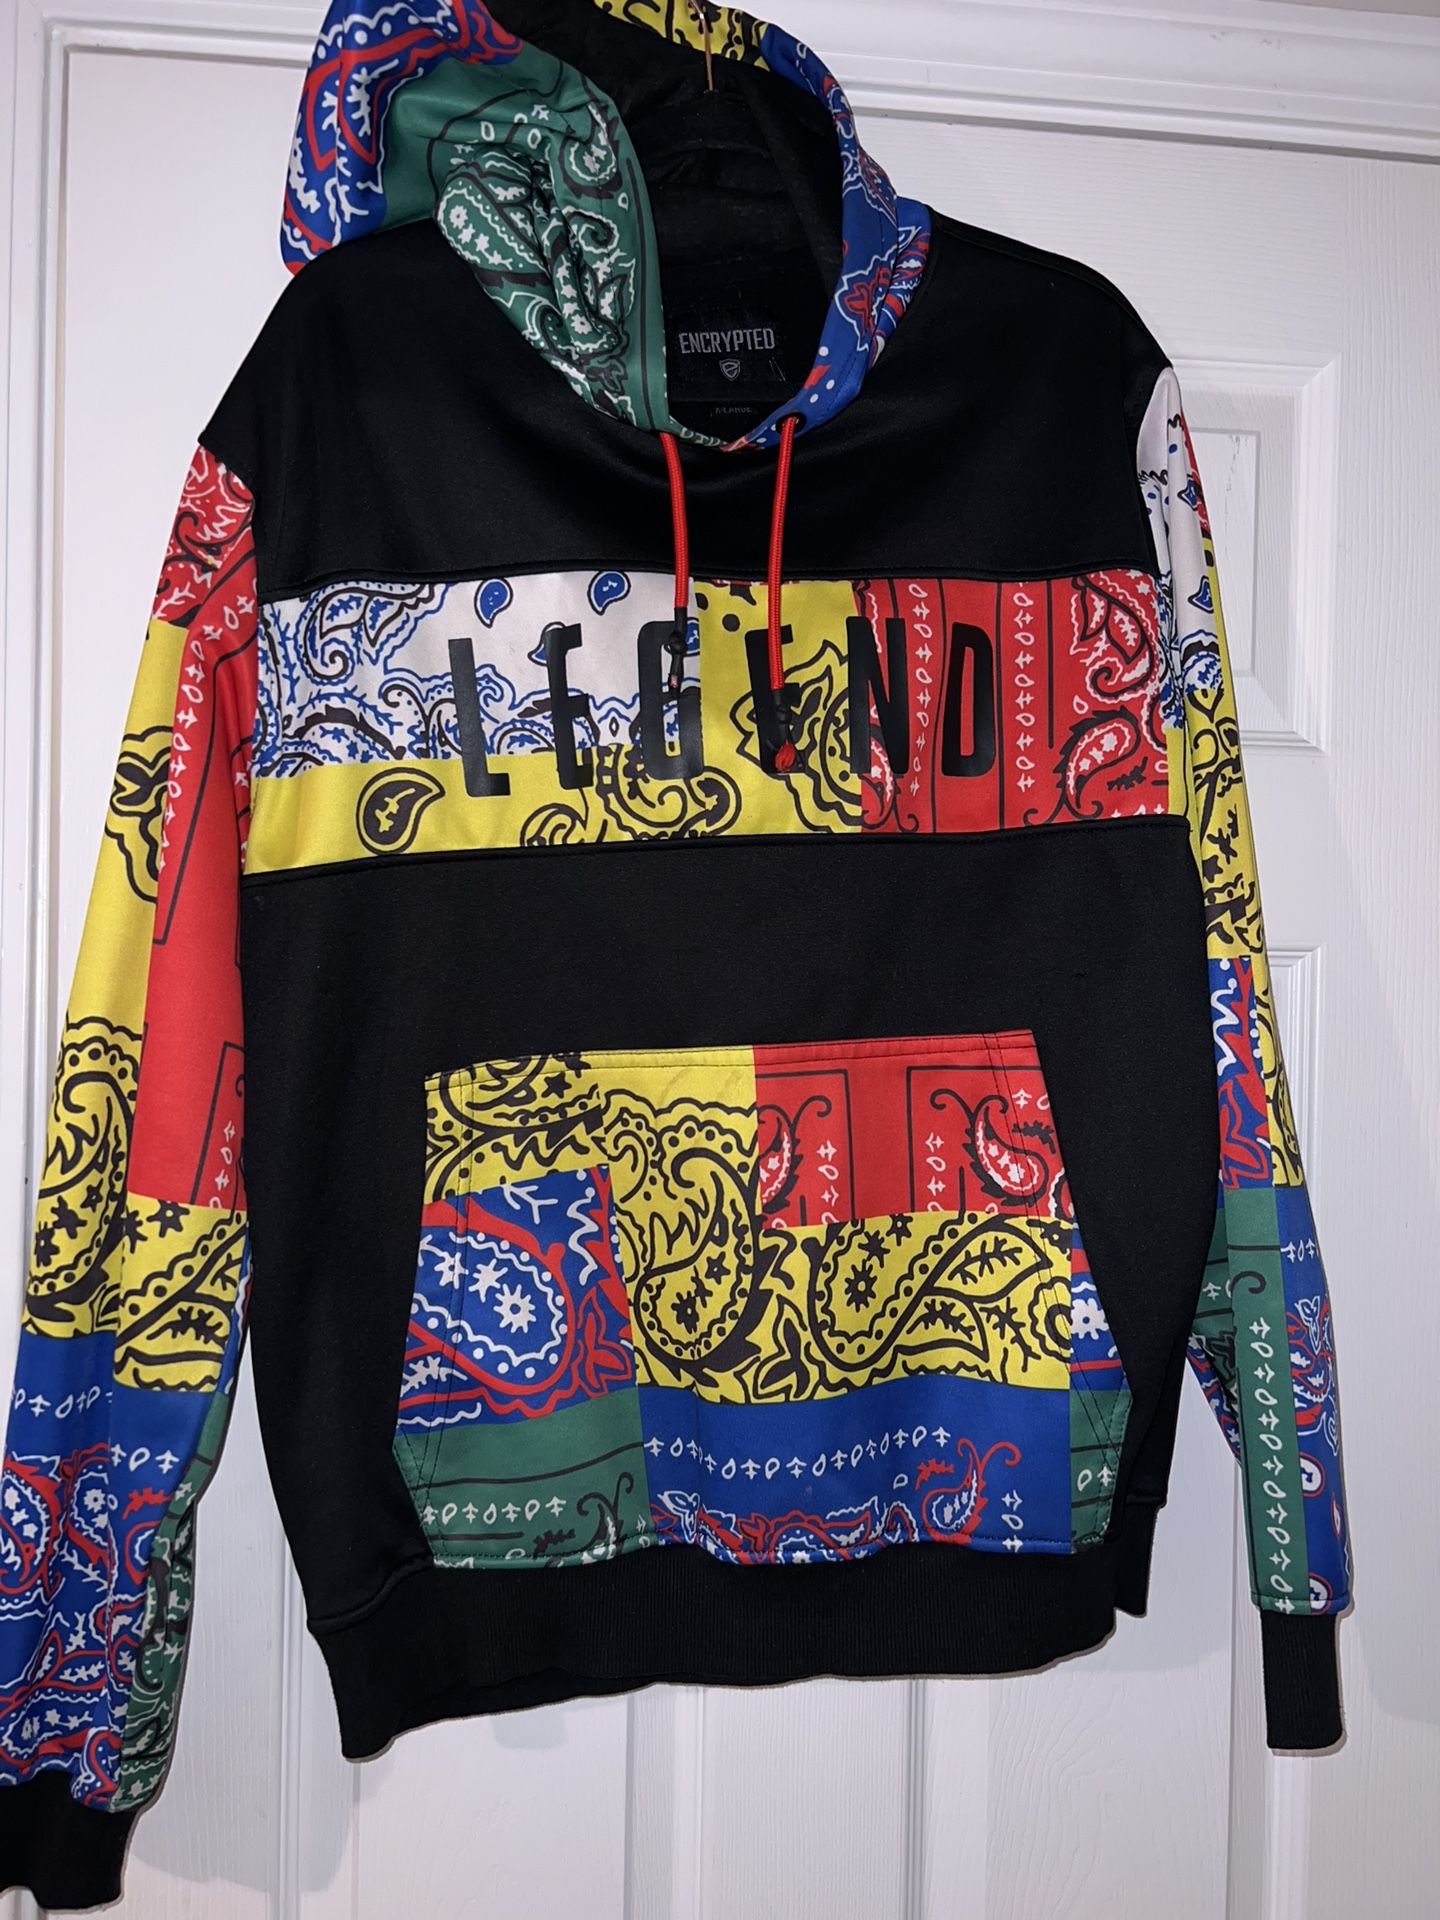 Encrypted LEGEND hoodie size XL